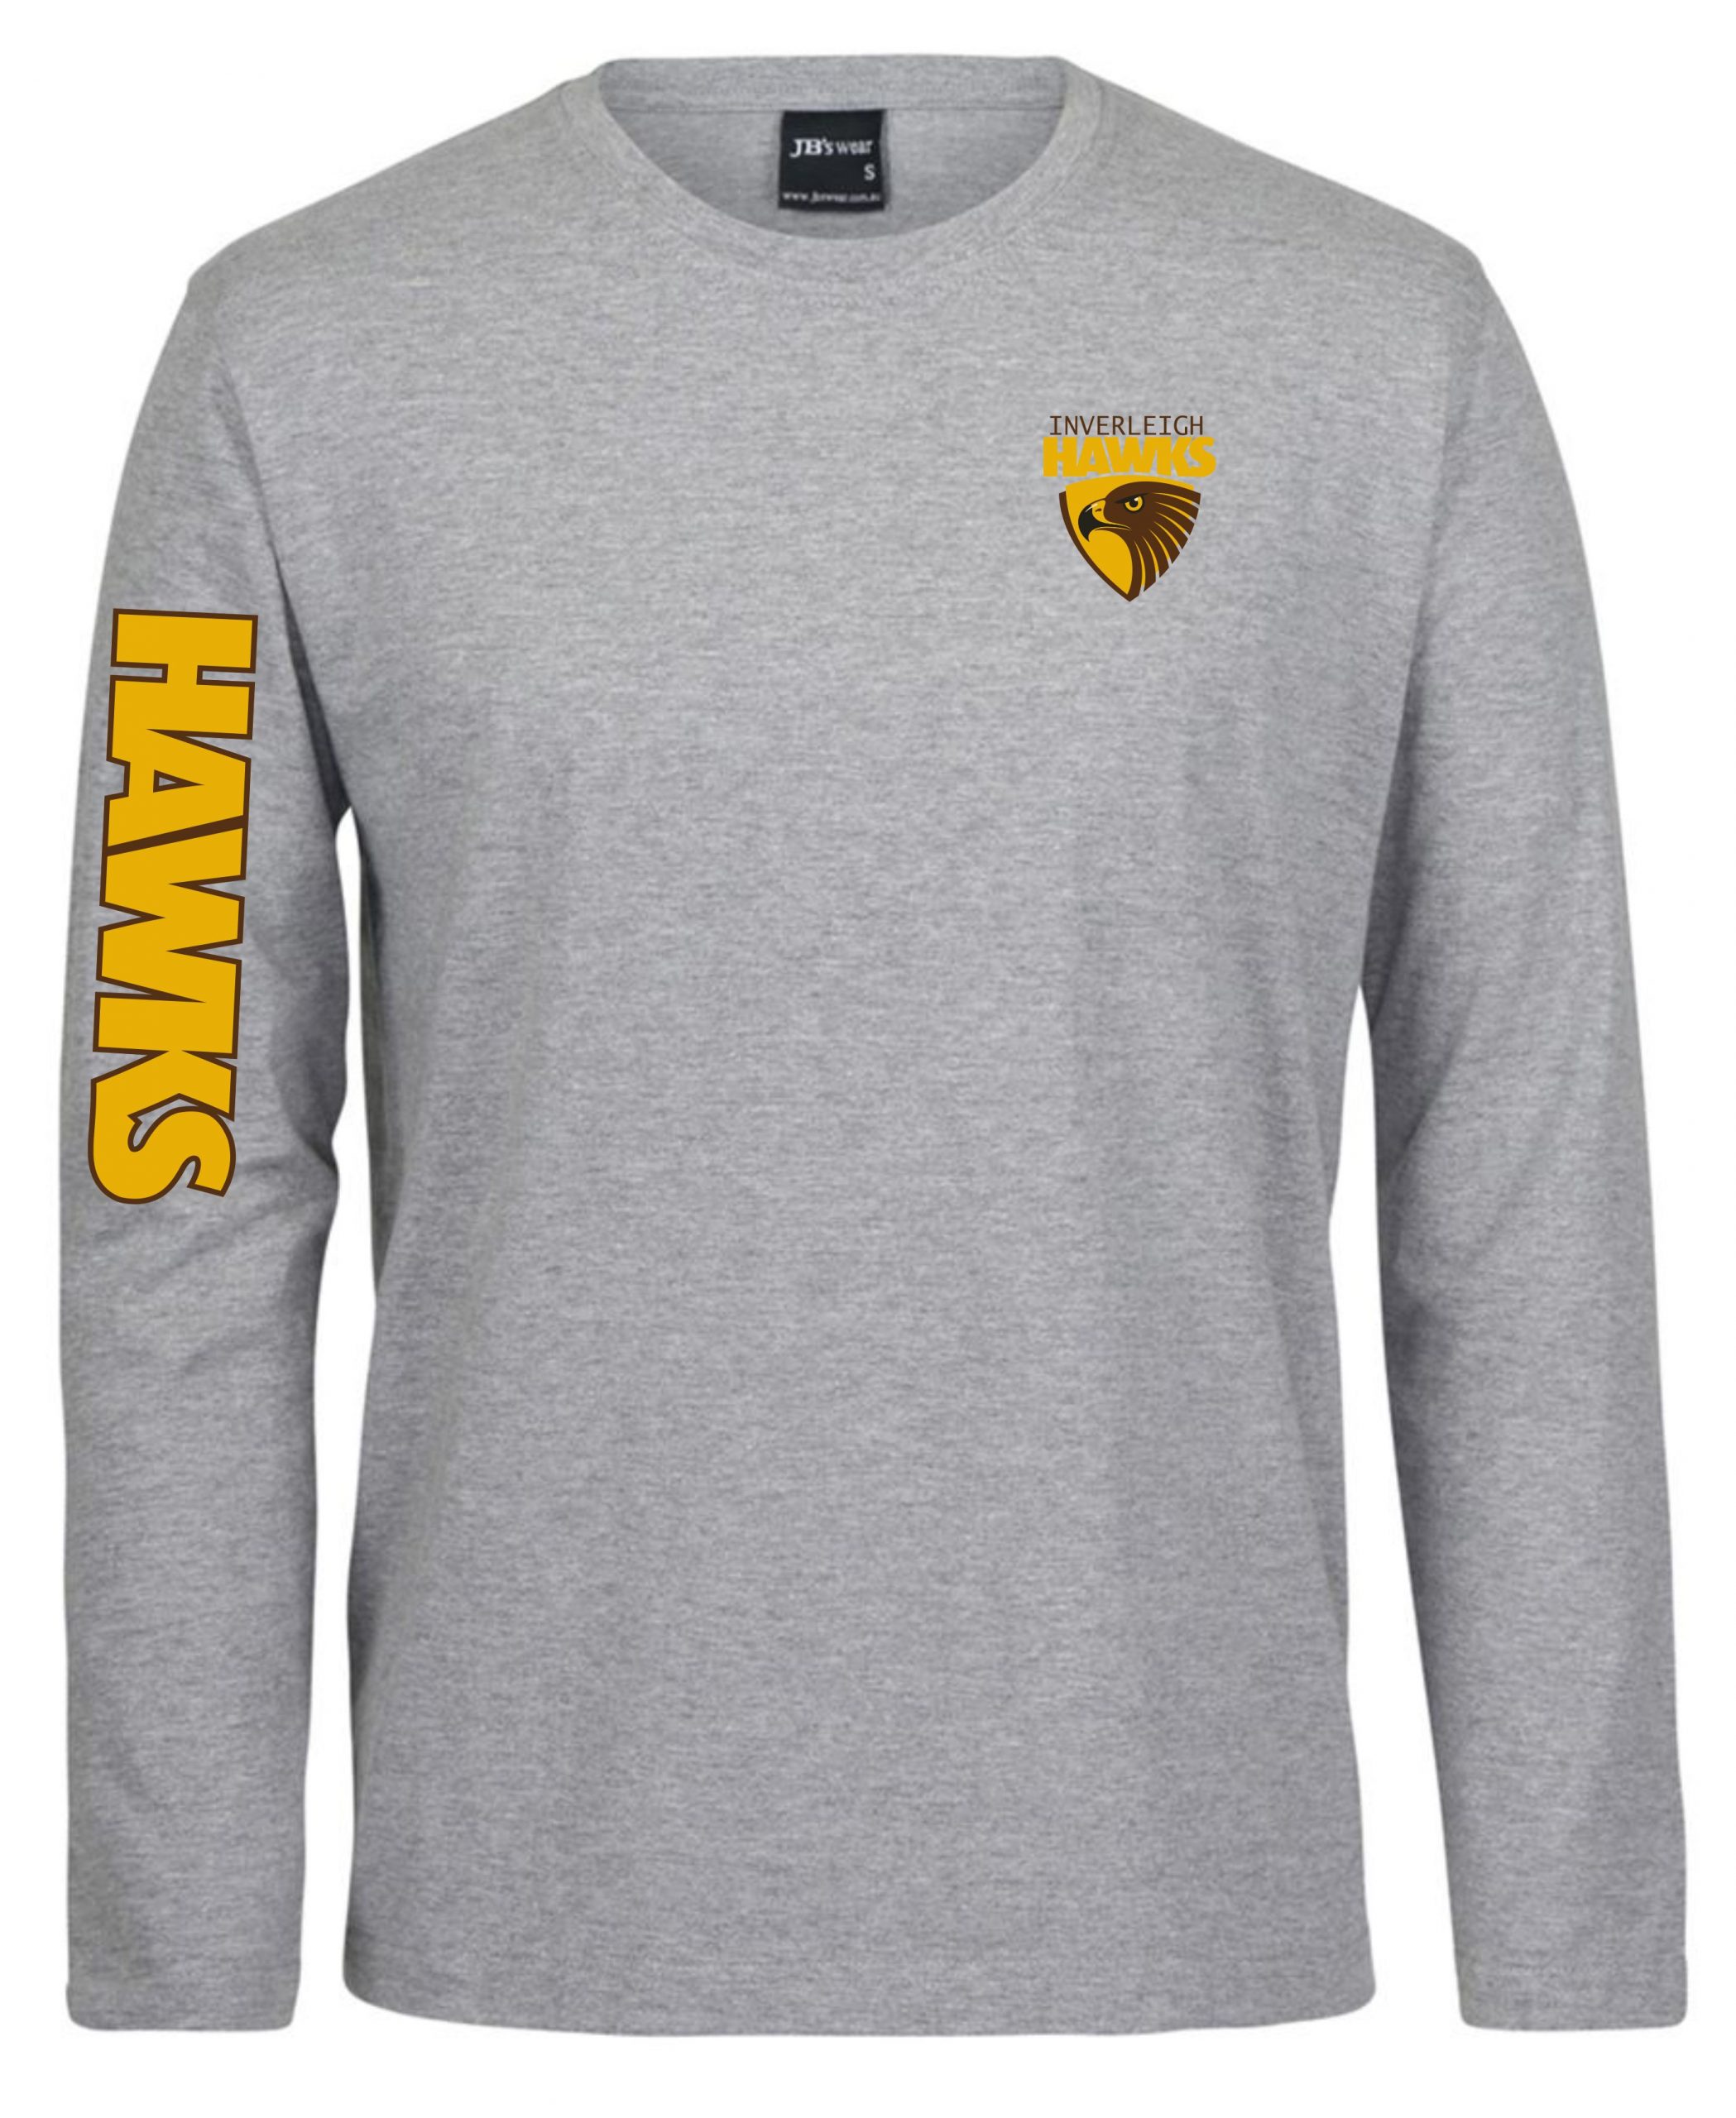 Long Sleeve Tee with No Cuff in Black or 13% Grey